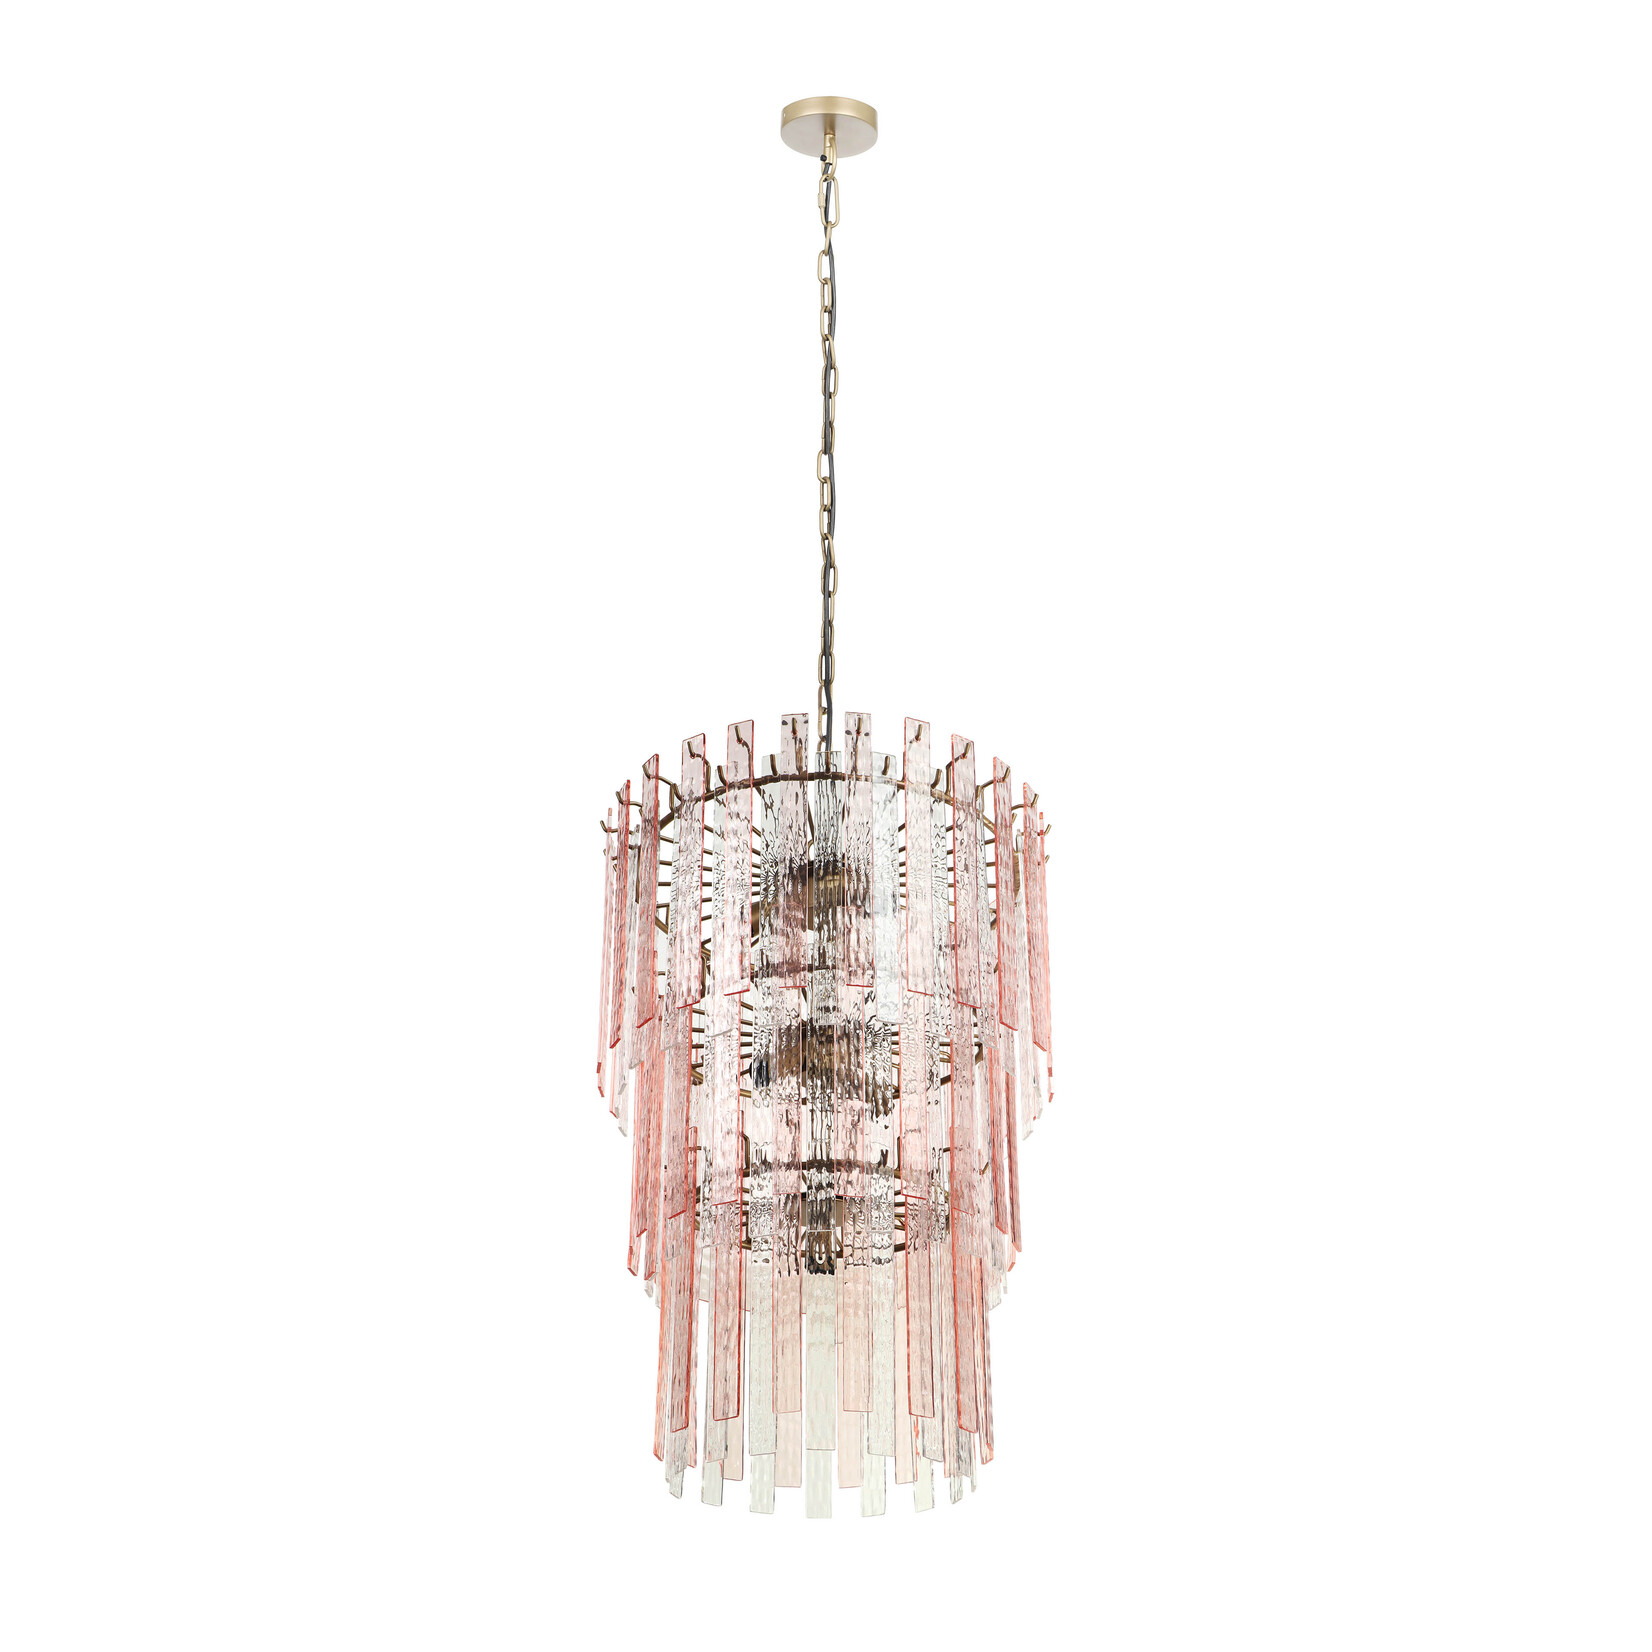 Tov SHIRE PINK ACRYLIC 3-TIER CHANDELIER